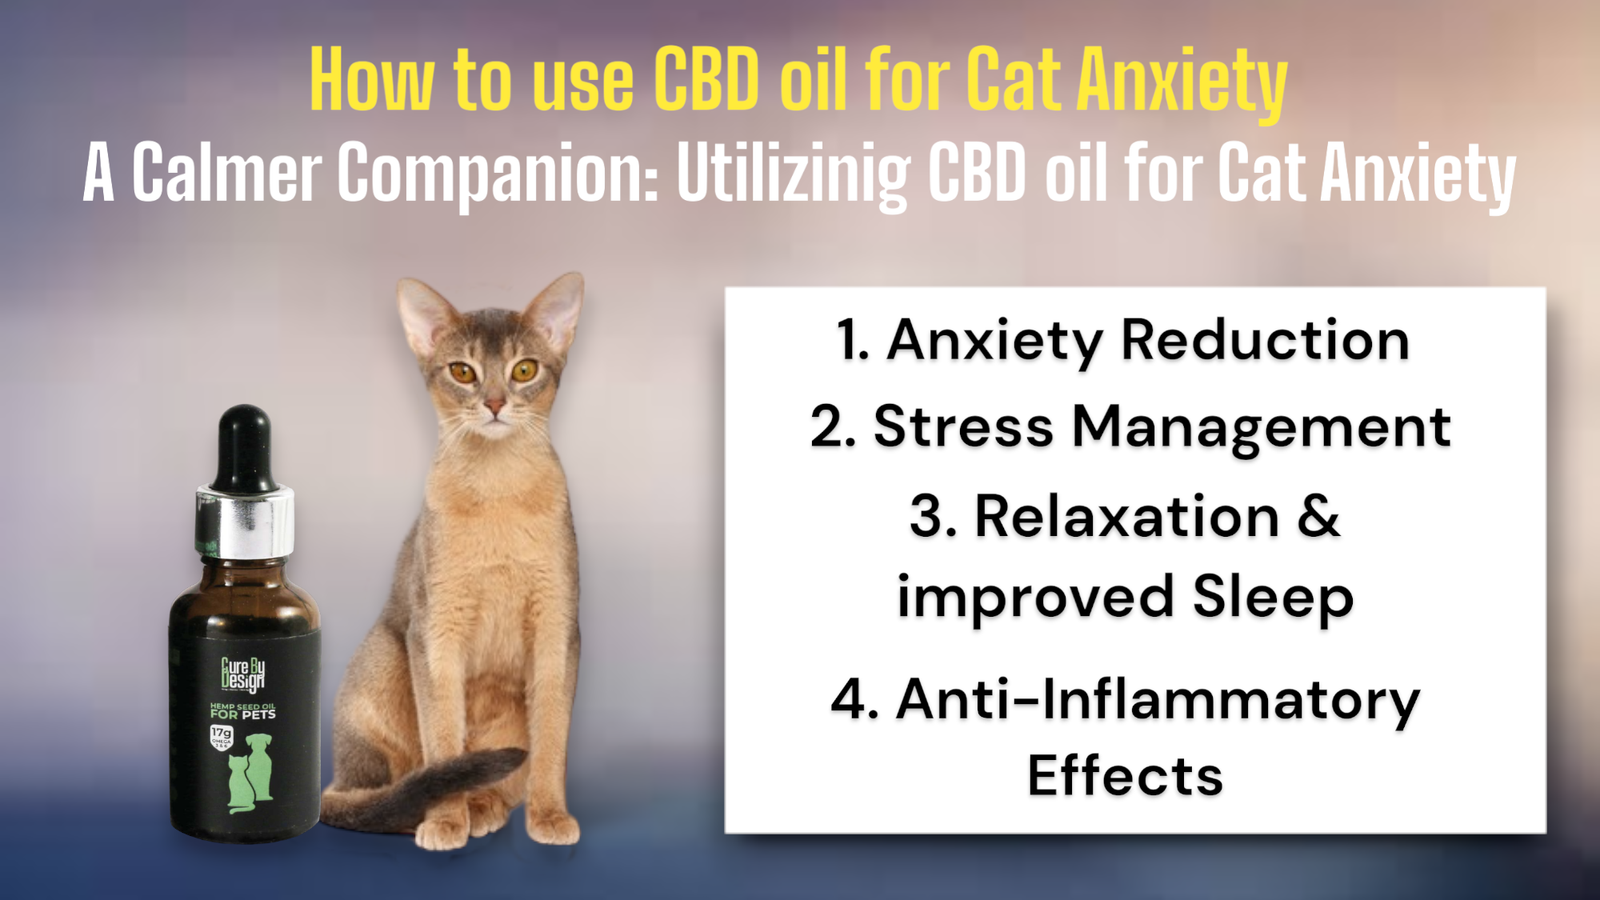 How to use CBD oil For Cat Anxiety A Calmer Companion: Utilizing CBD Oil for Cat Anxiety